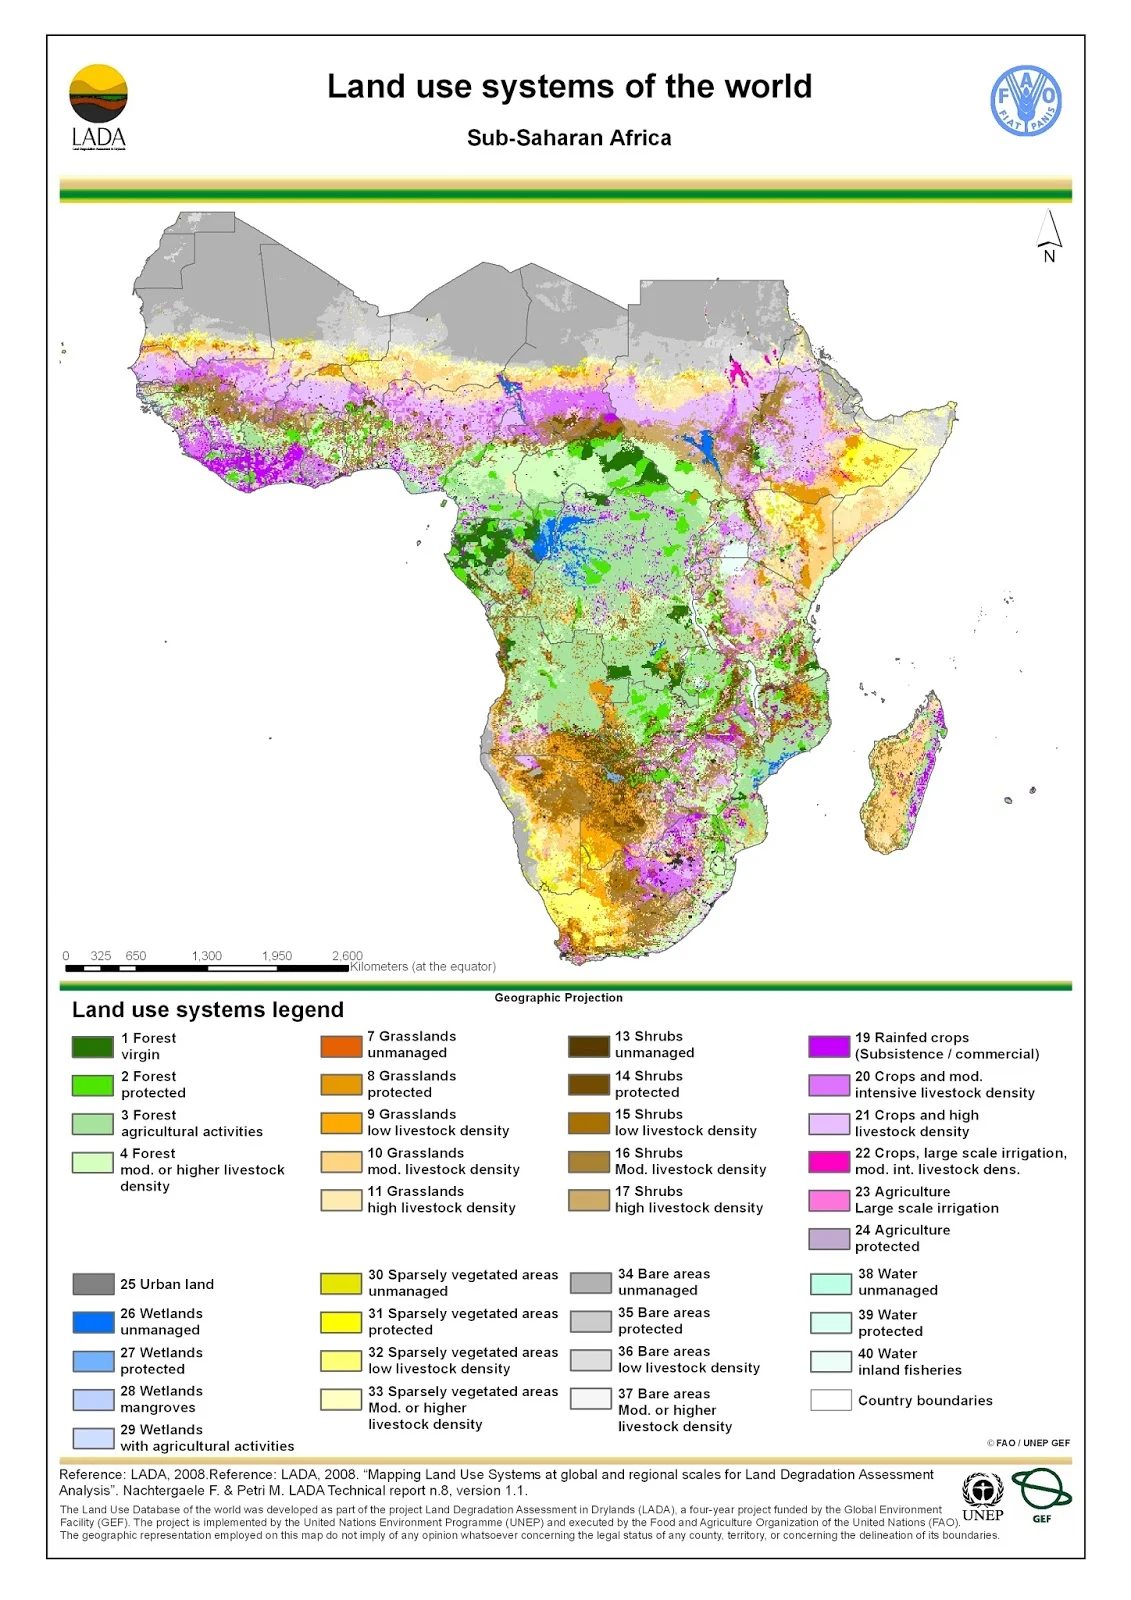 Africa: Land use map